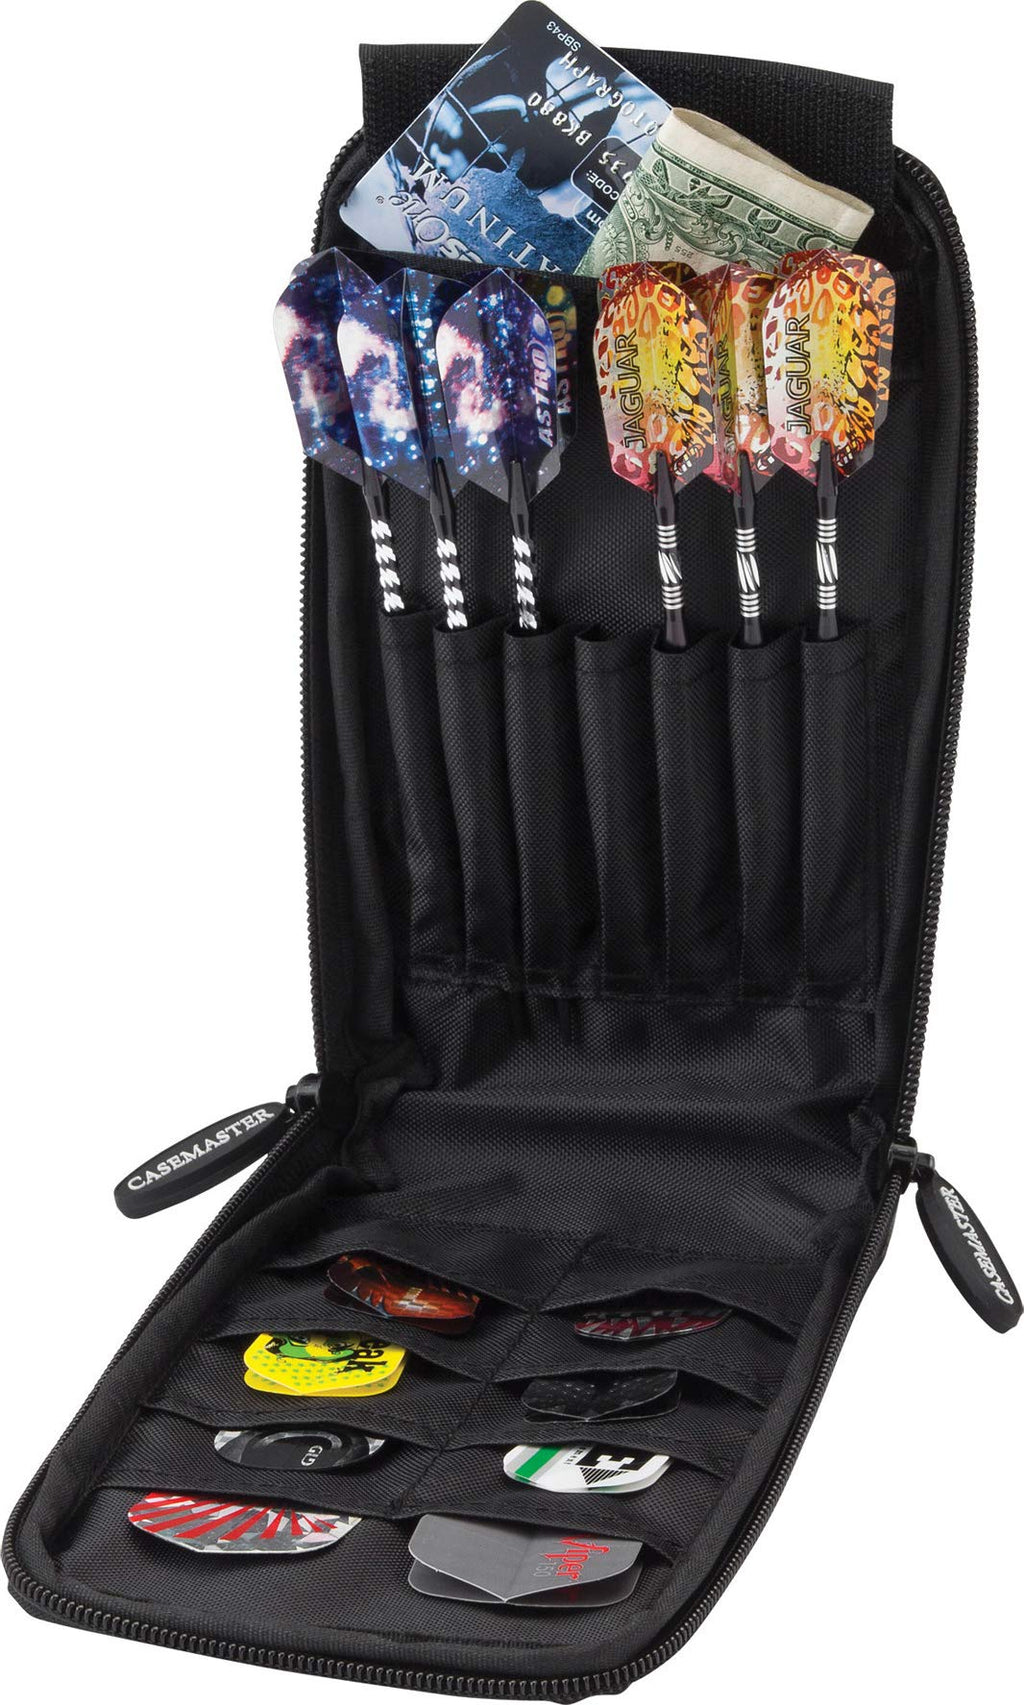 Casemaster Mini Pro Black Leatherette Dart Case with Room for 6 Darts, Steel Tip or Soft Tip, with Slim Profile Leather-Like Covering and Built-in Pockets for Flights, Shafts and Tips - BeesActive Australia